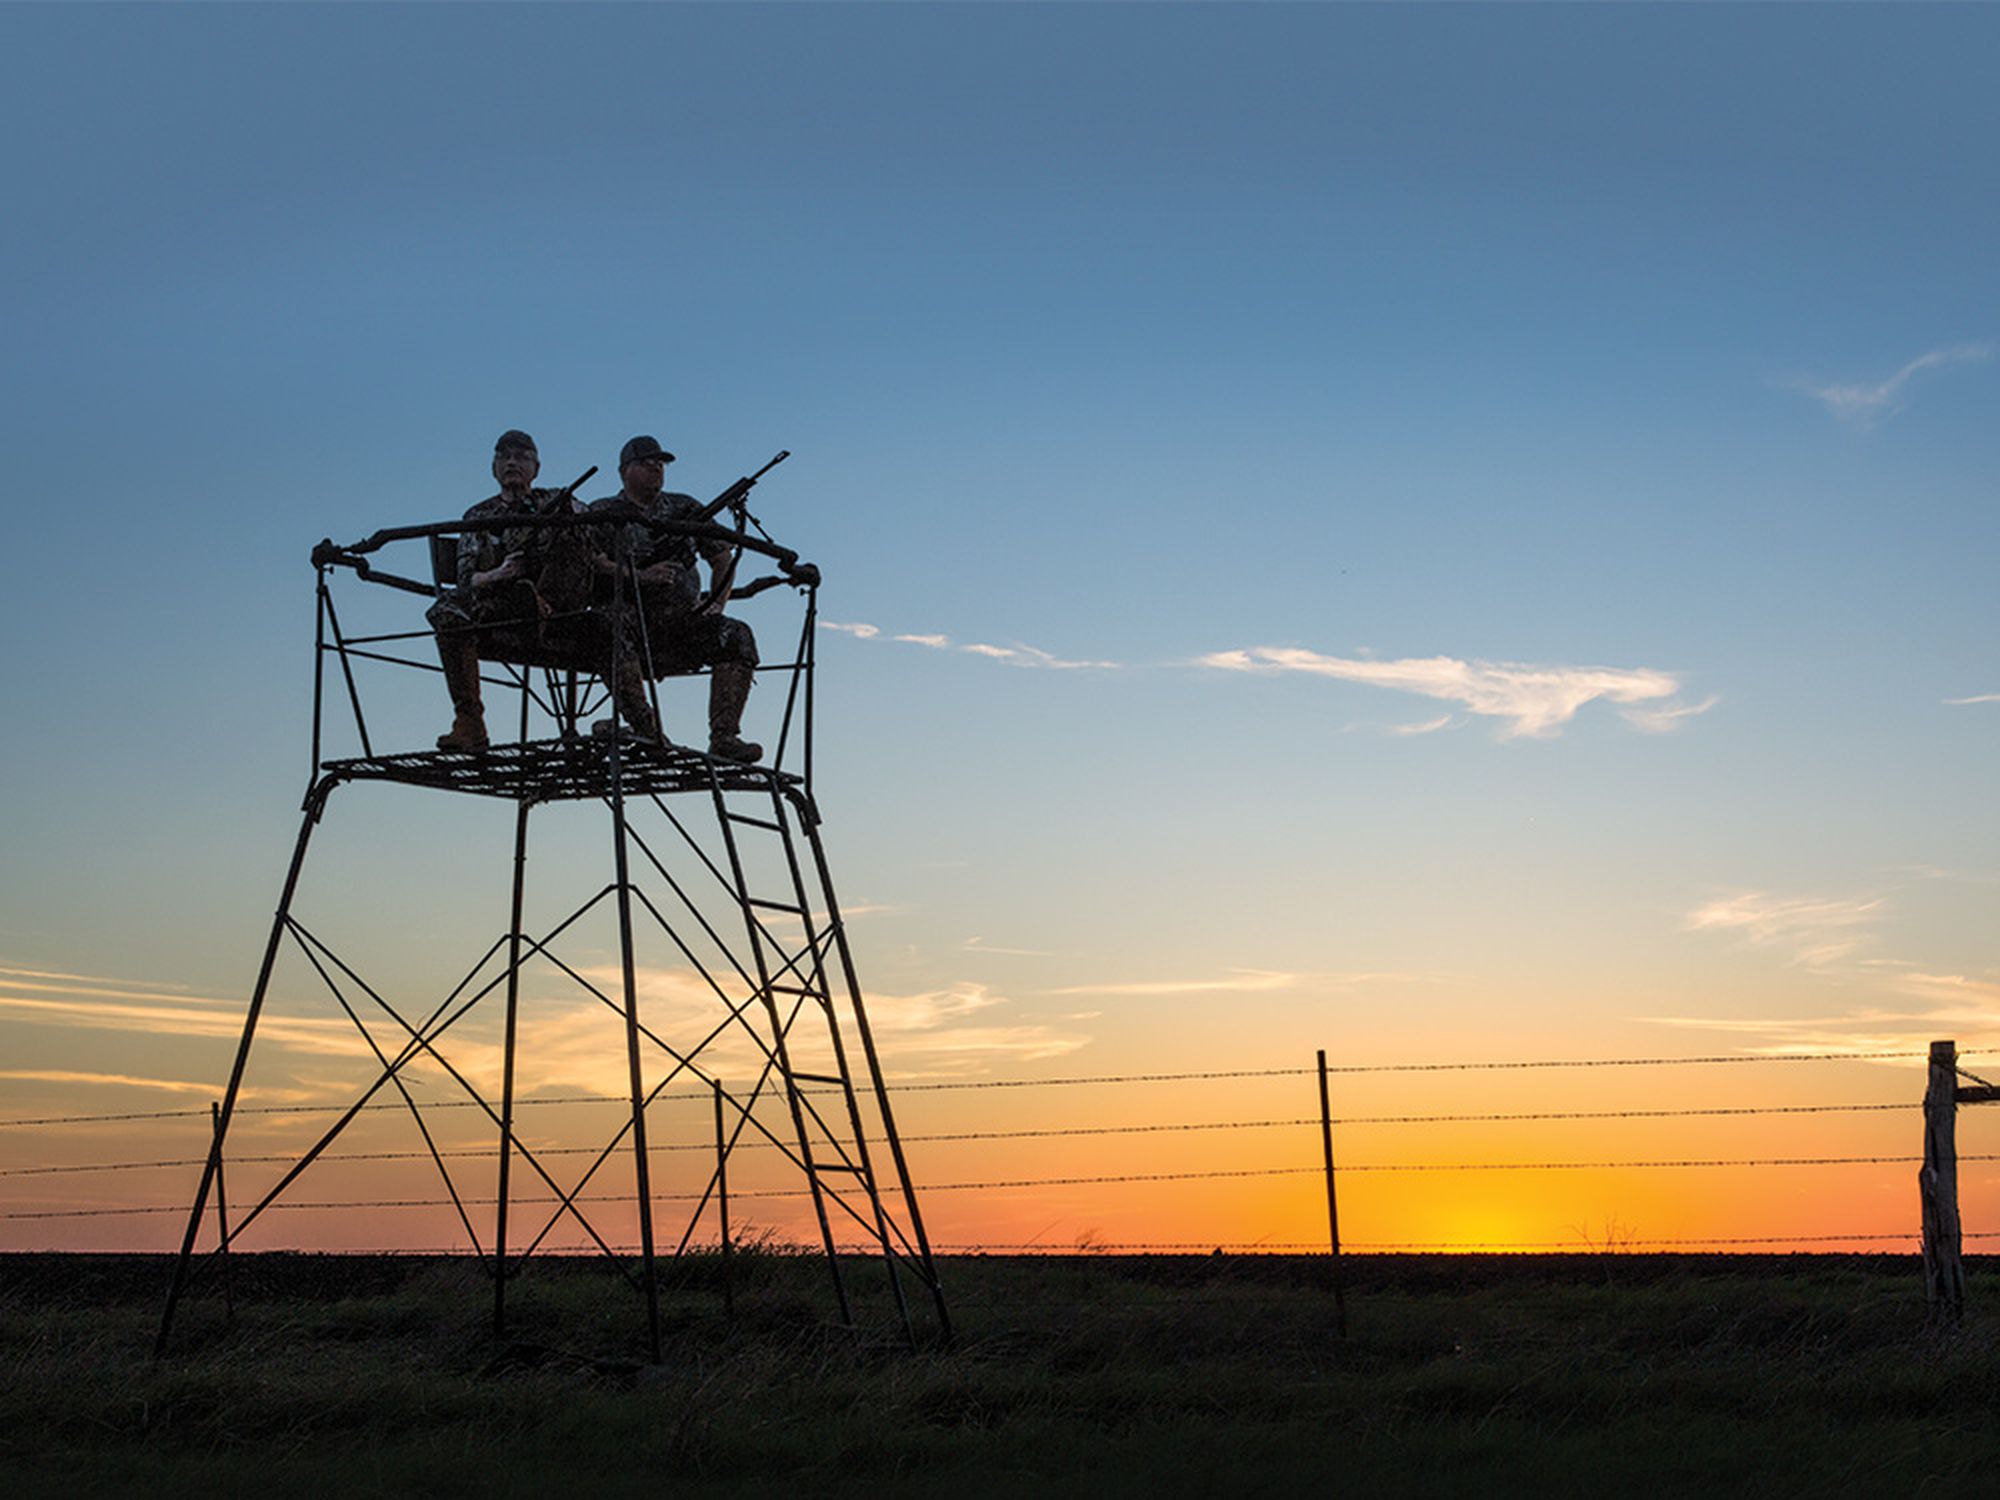 Tower-stand hunters await the arrival of feeding pigs near Midlothian, Texas.